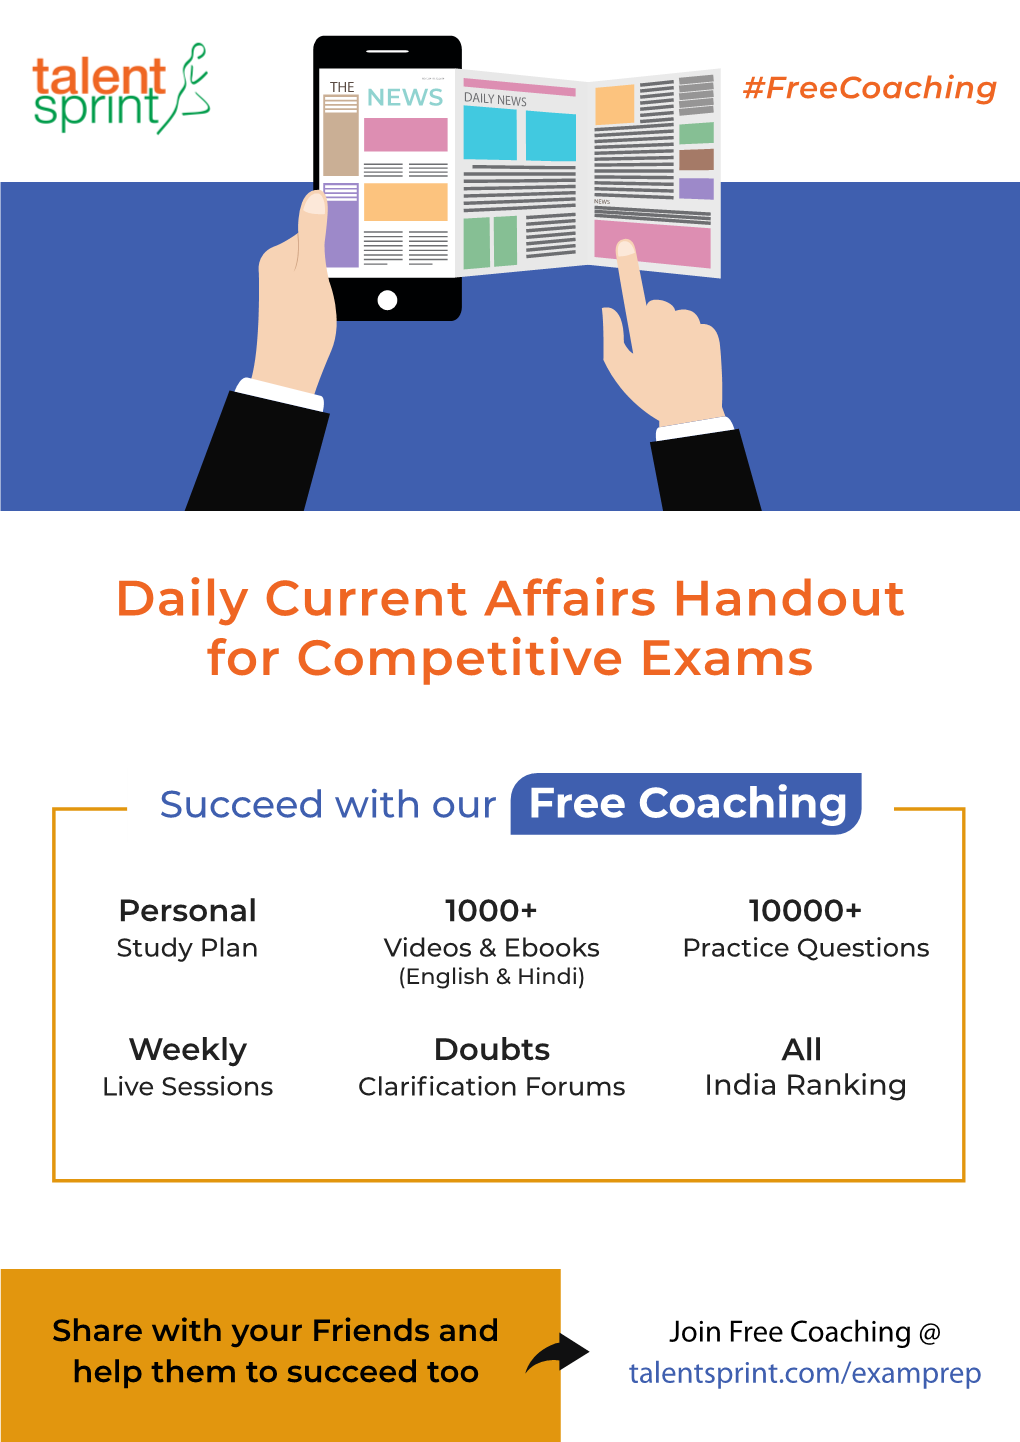 Daily Current Affairs Handout for Competitive Exams